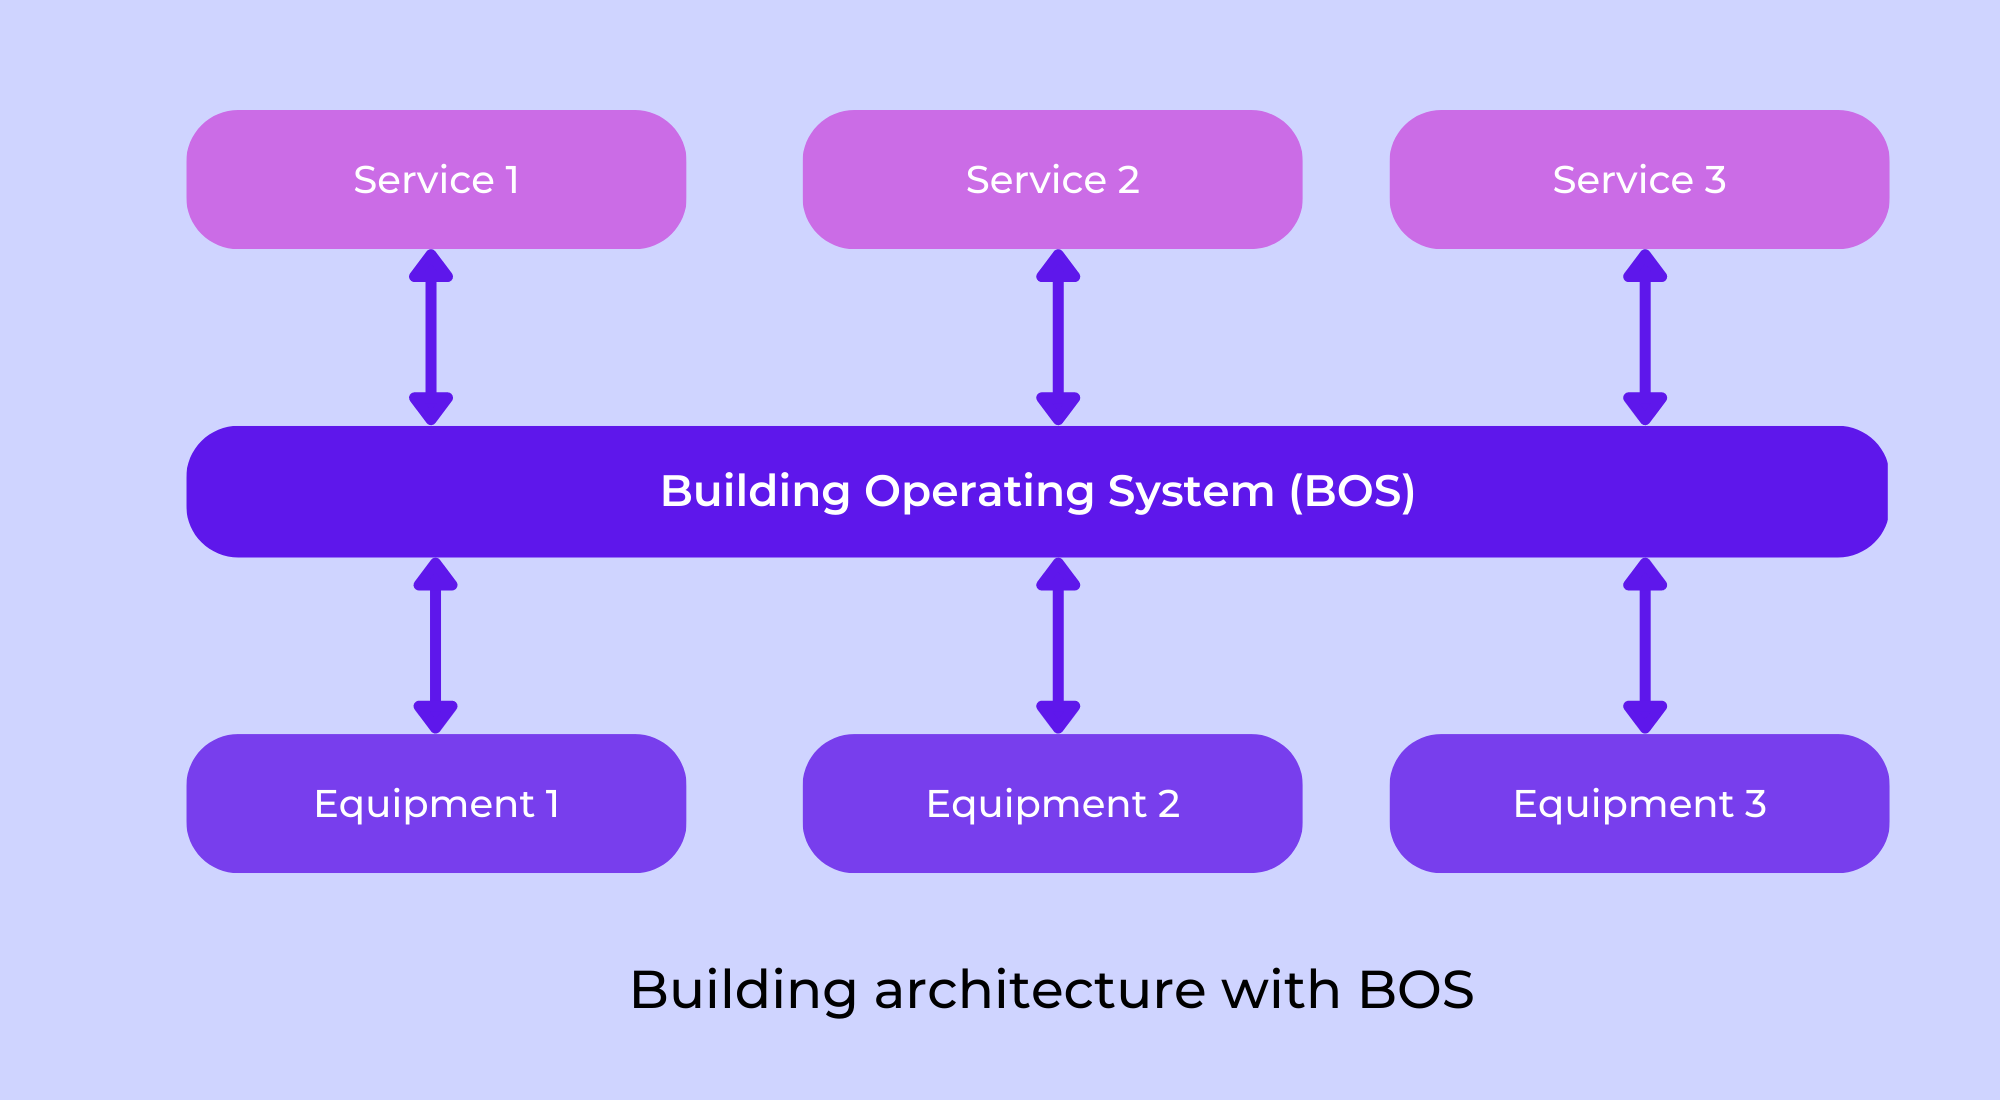 Building Operating System with BOS